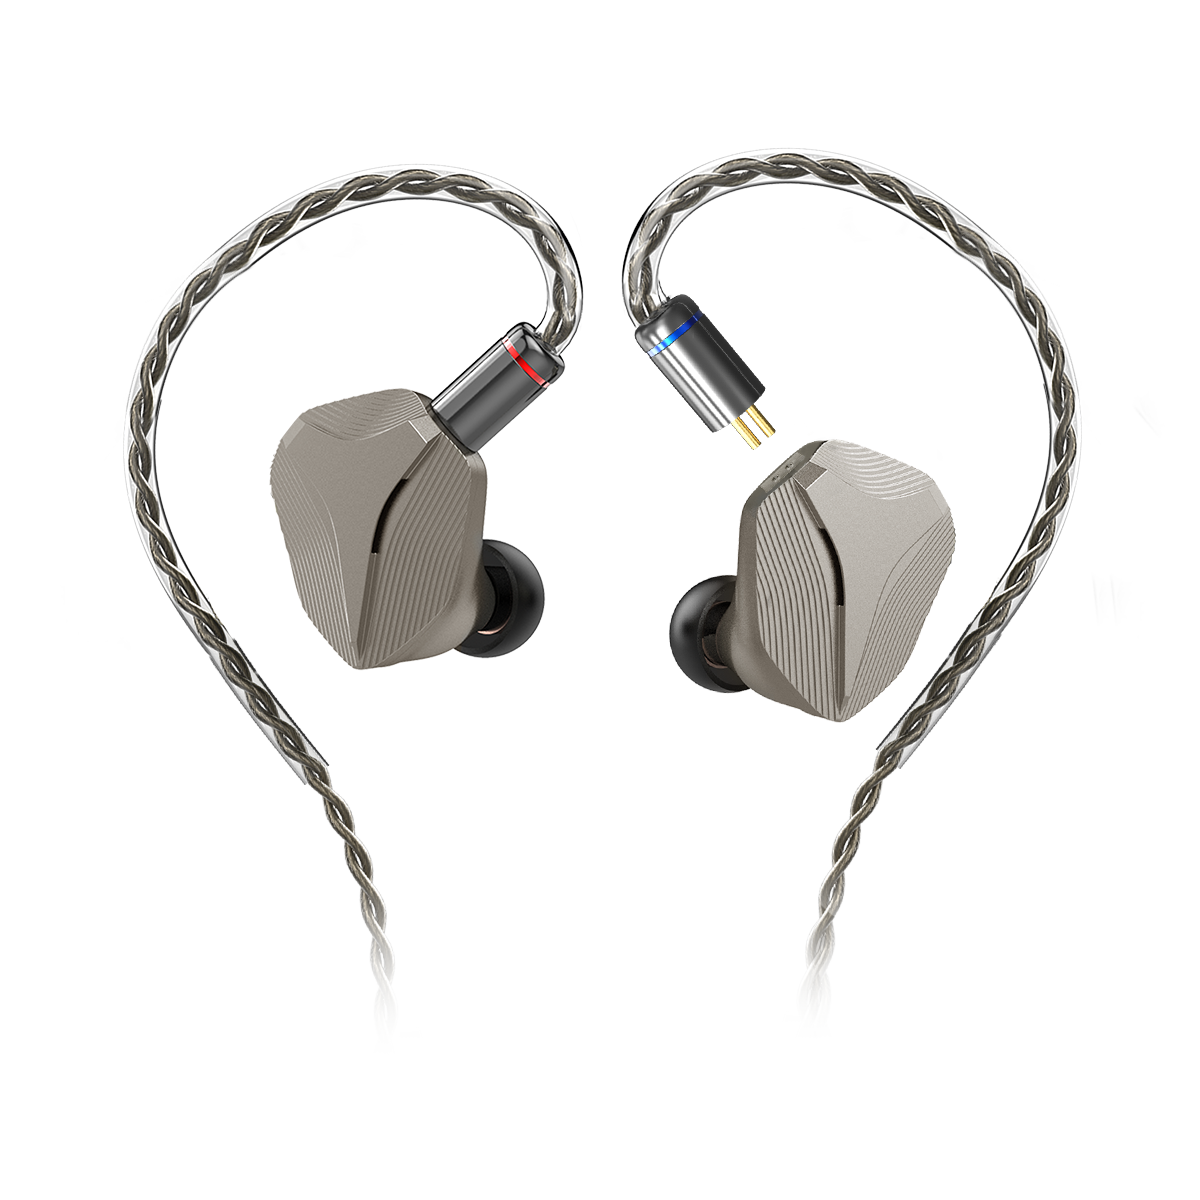 HIDIZS MP145 Planar Magnetic Driver In Ear Monitors for Audiophiles and Music Lovers